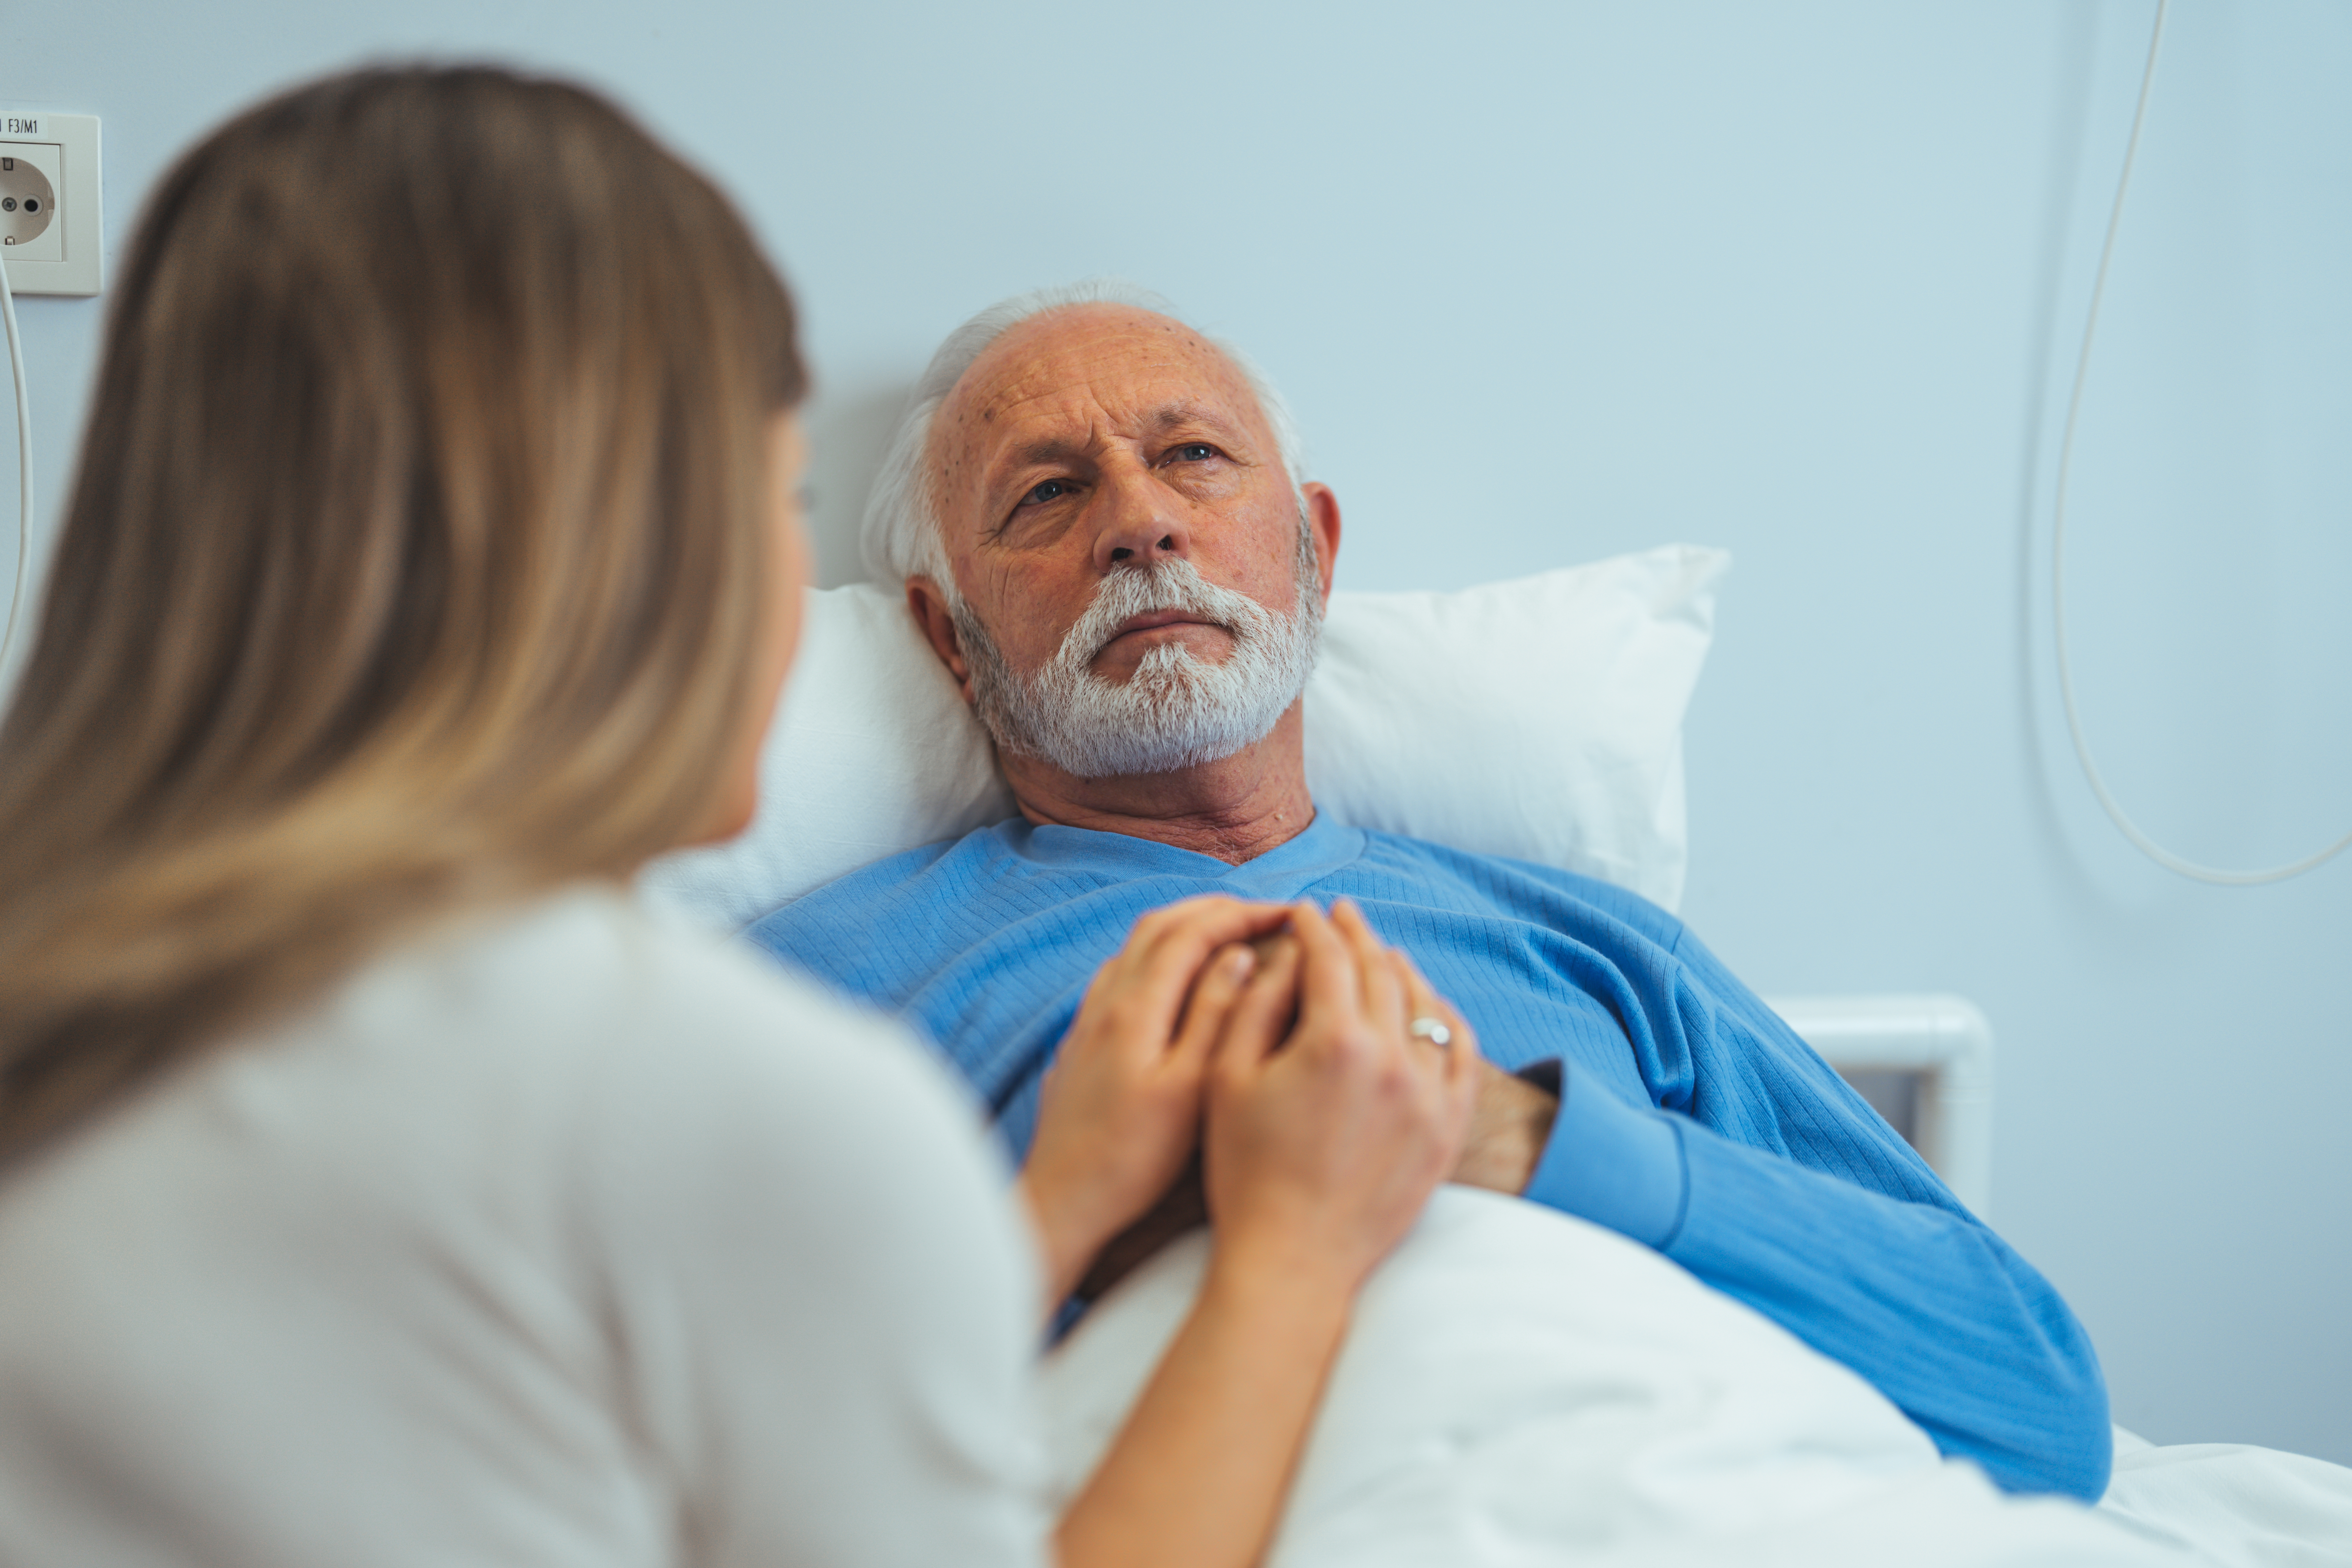 A young woman comforting her ill father in the hospital | Source: Shutterstock